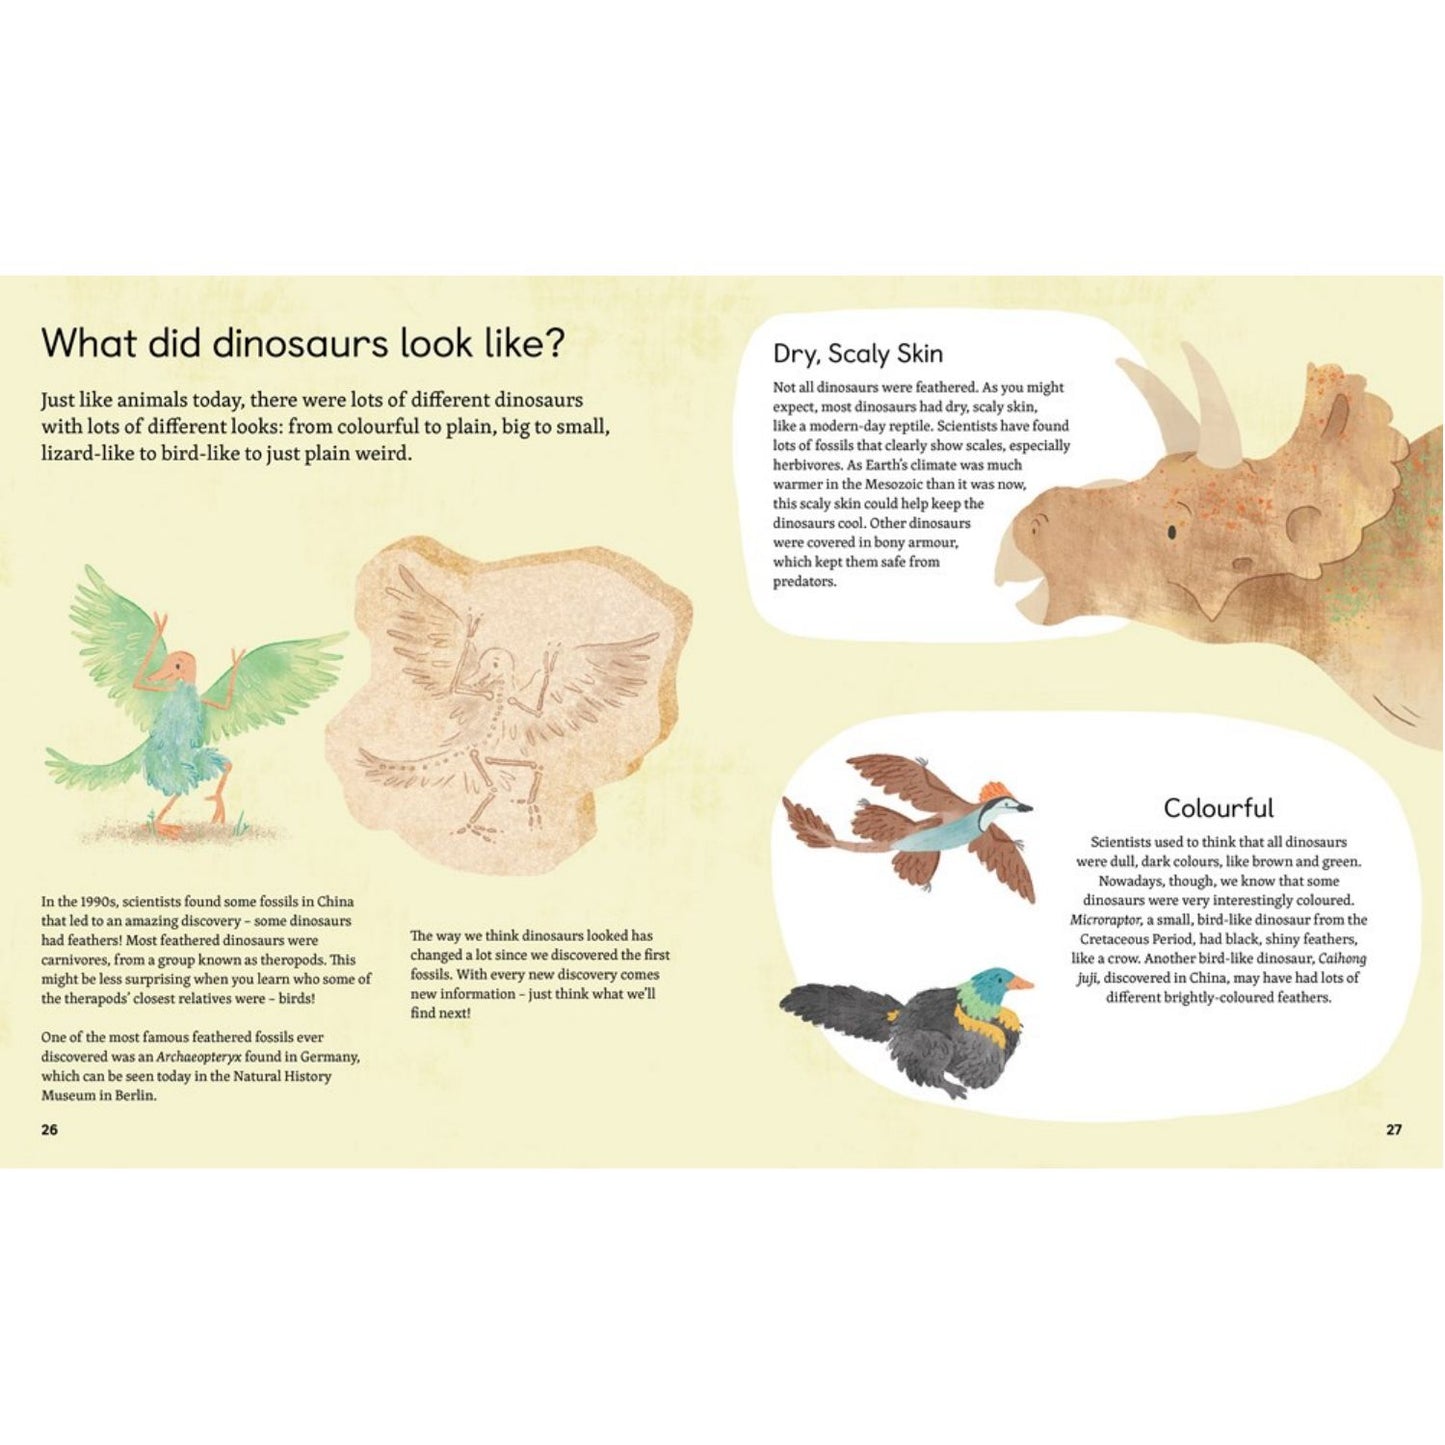 Ask Me About… Dinosaurs: Questions and Answers About the Prehistoric World | Children’s Book on Dinosaurs